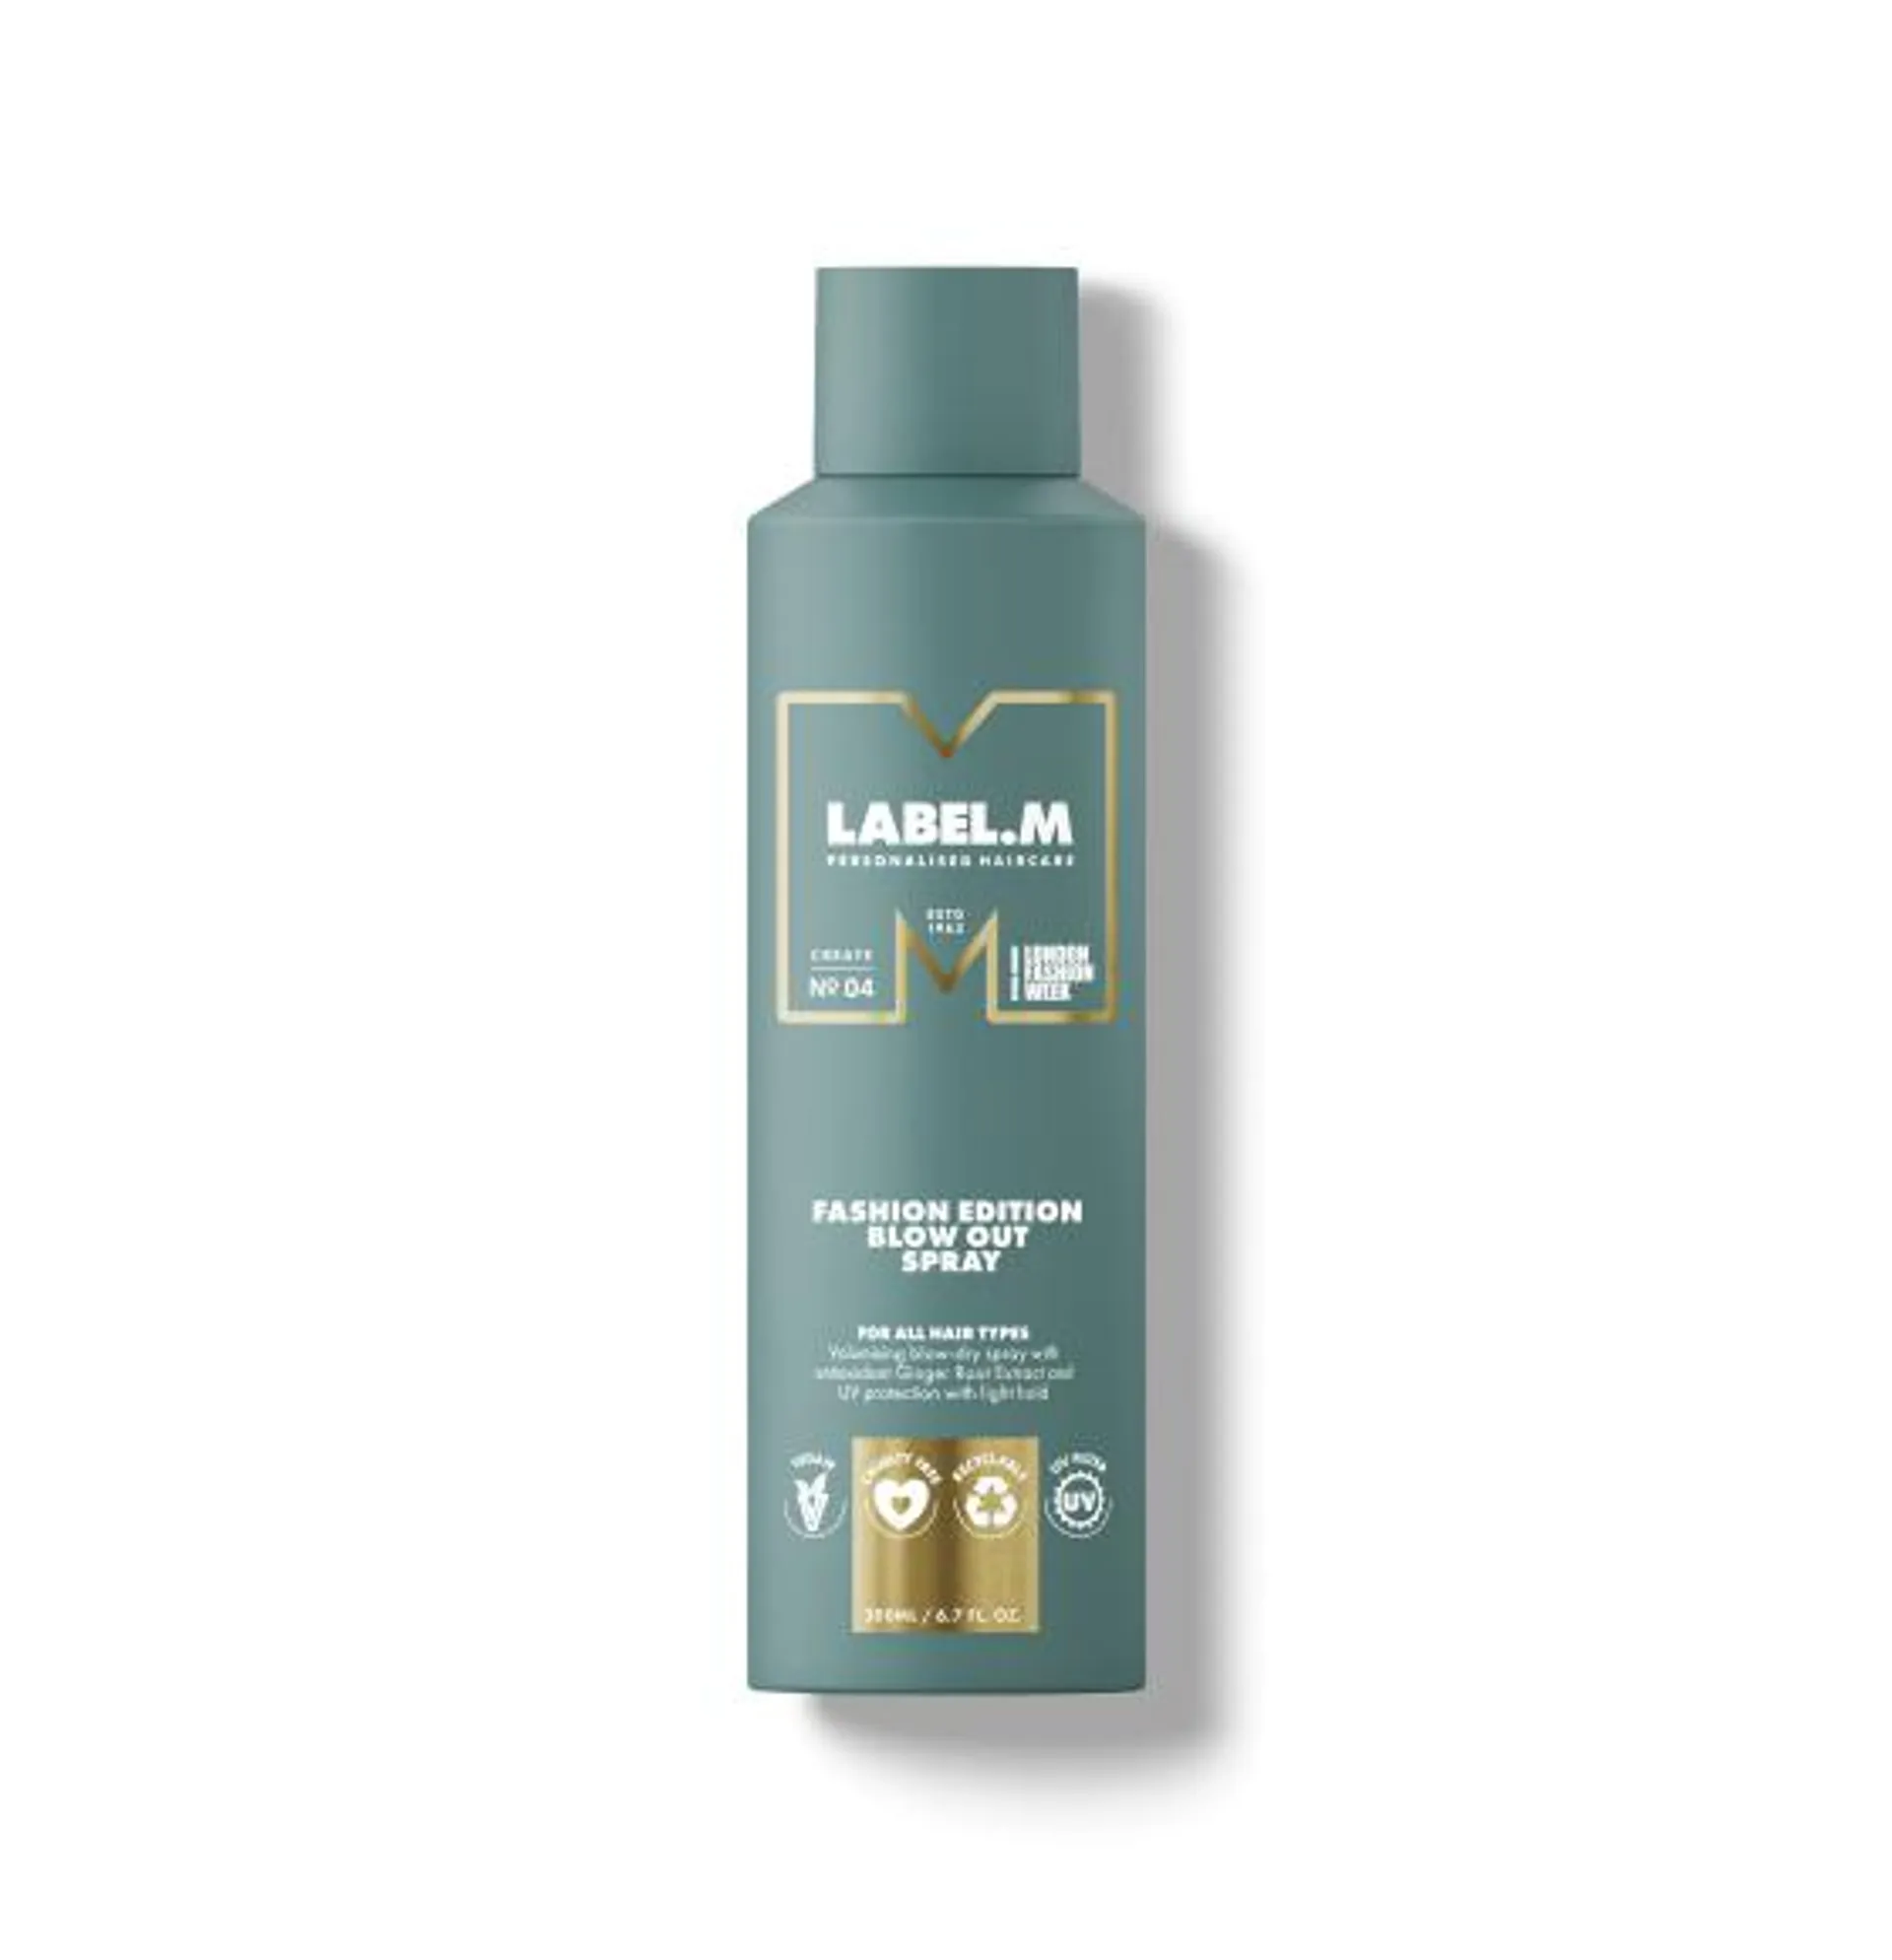 LABEL.M Fashion Edition Blow Out Spray